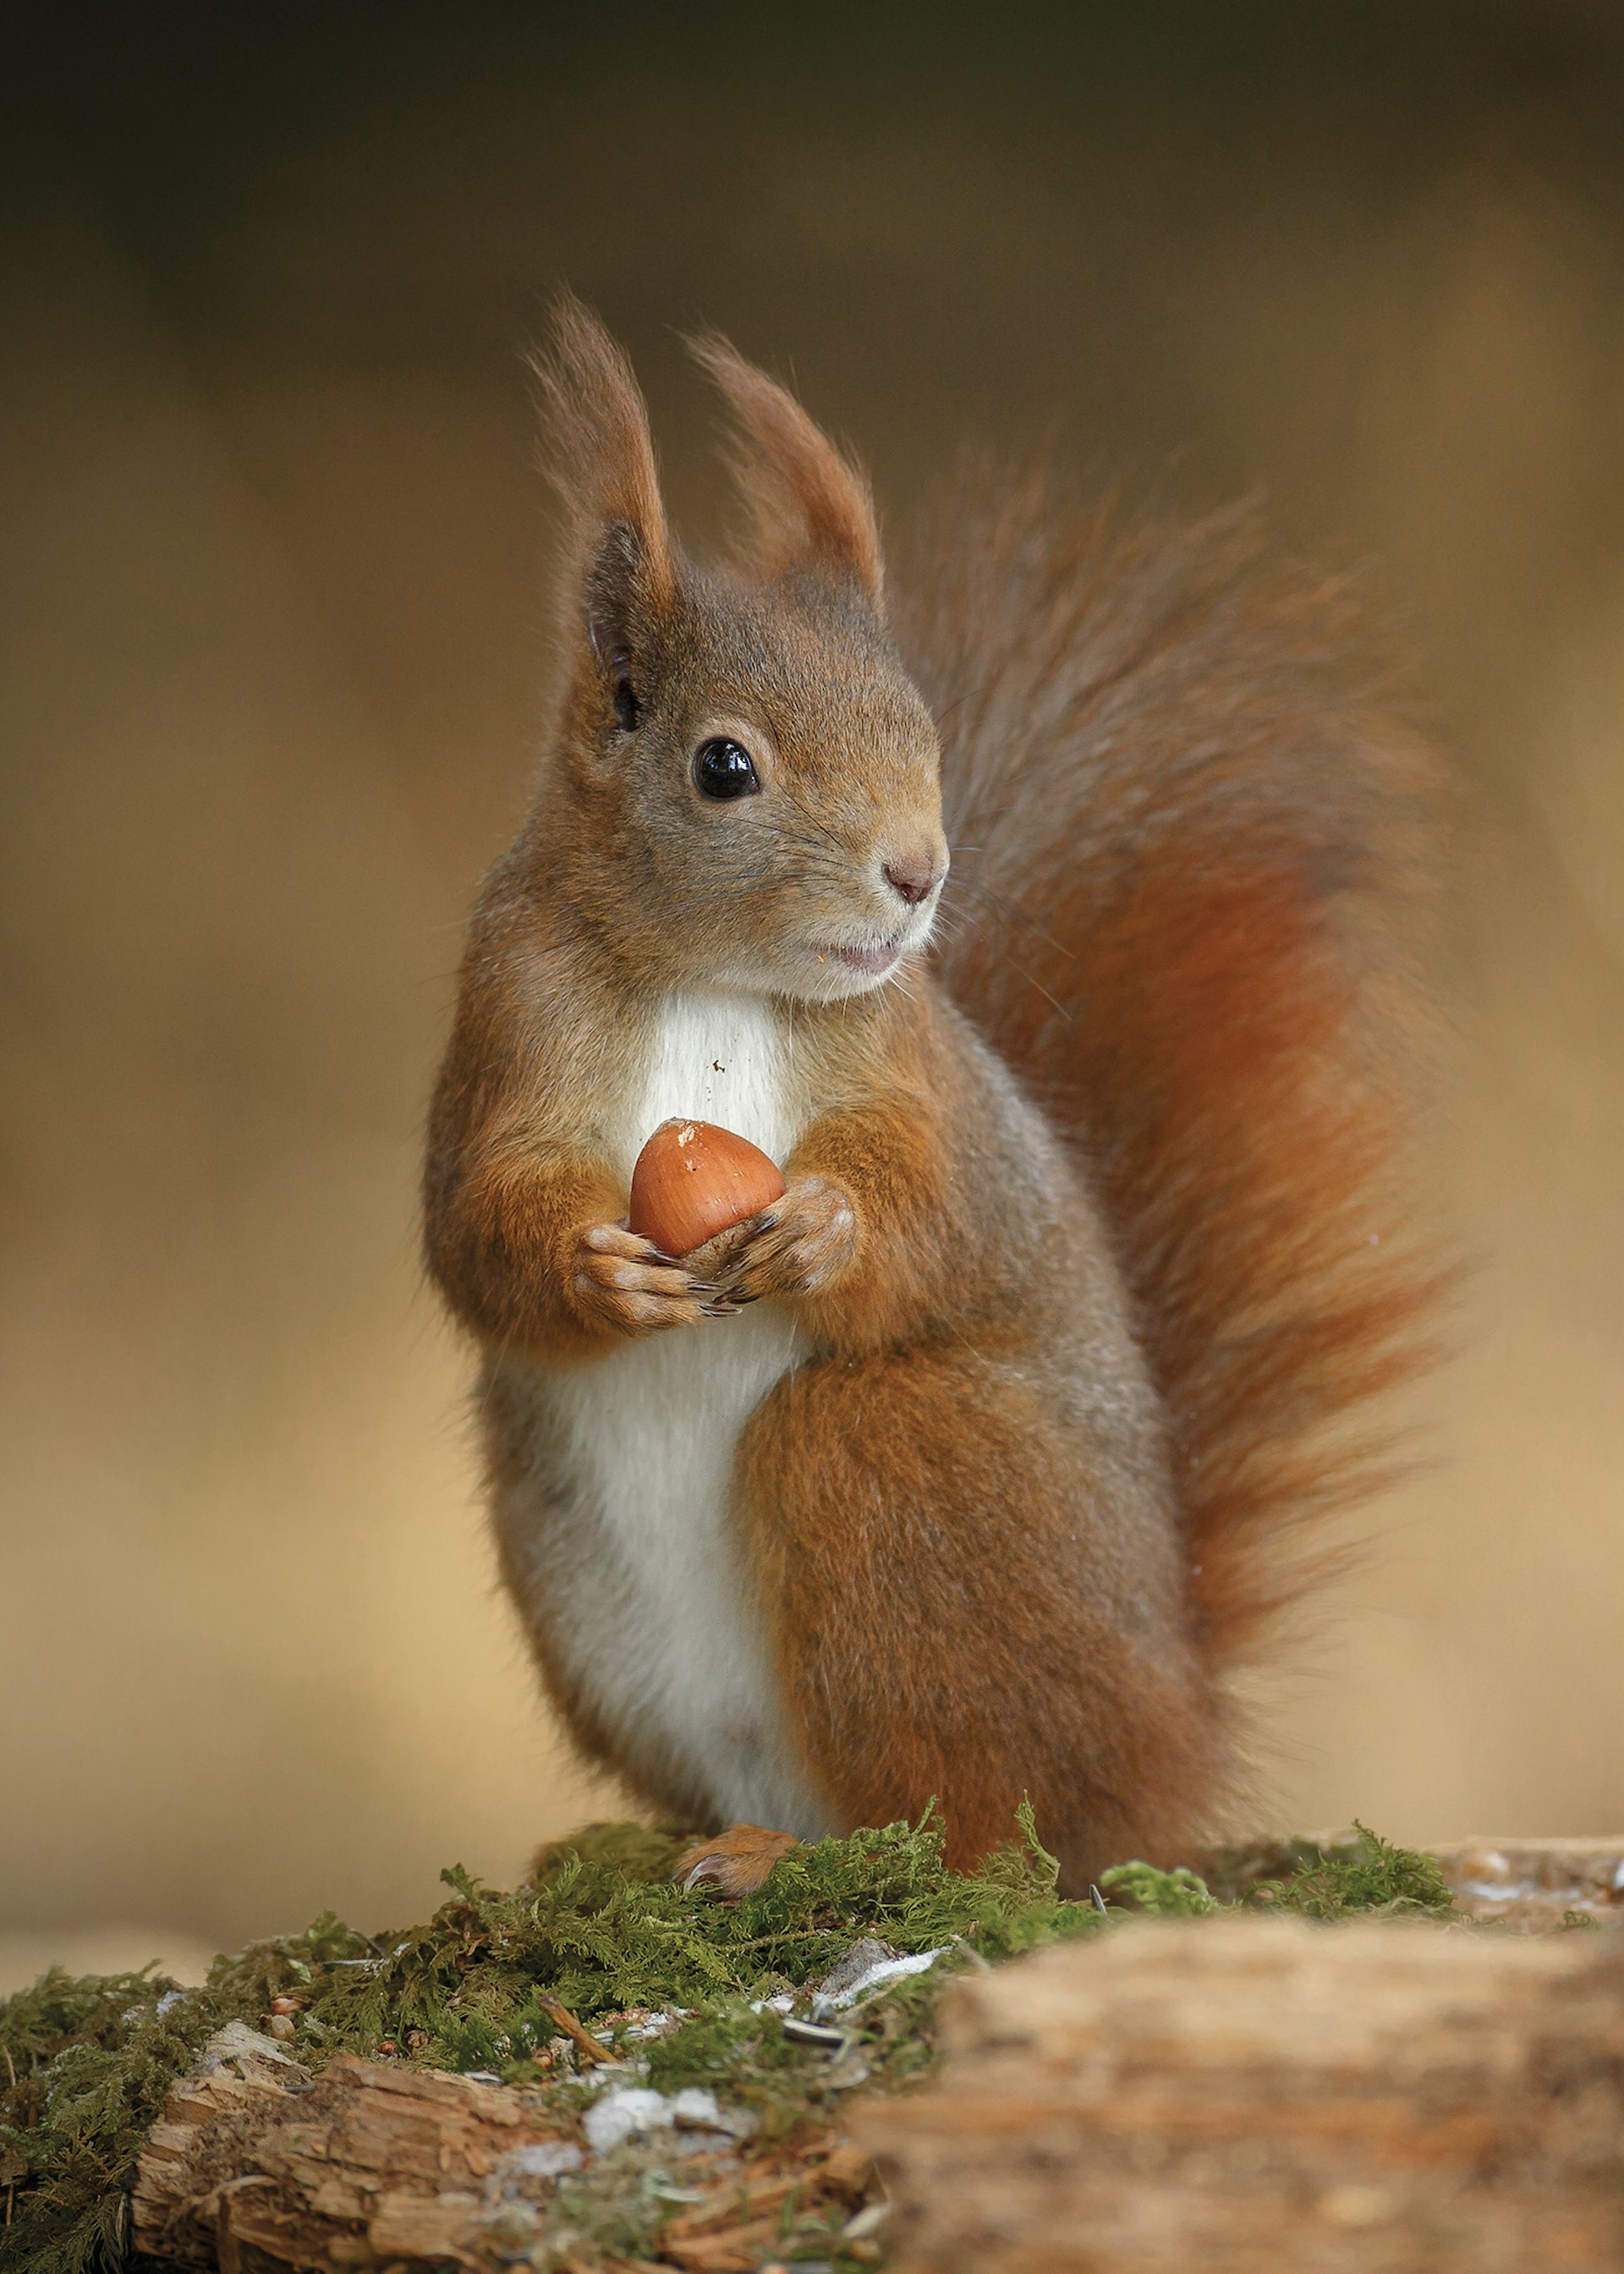  A red squirrel holding a nut